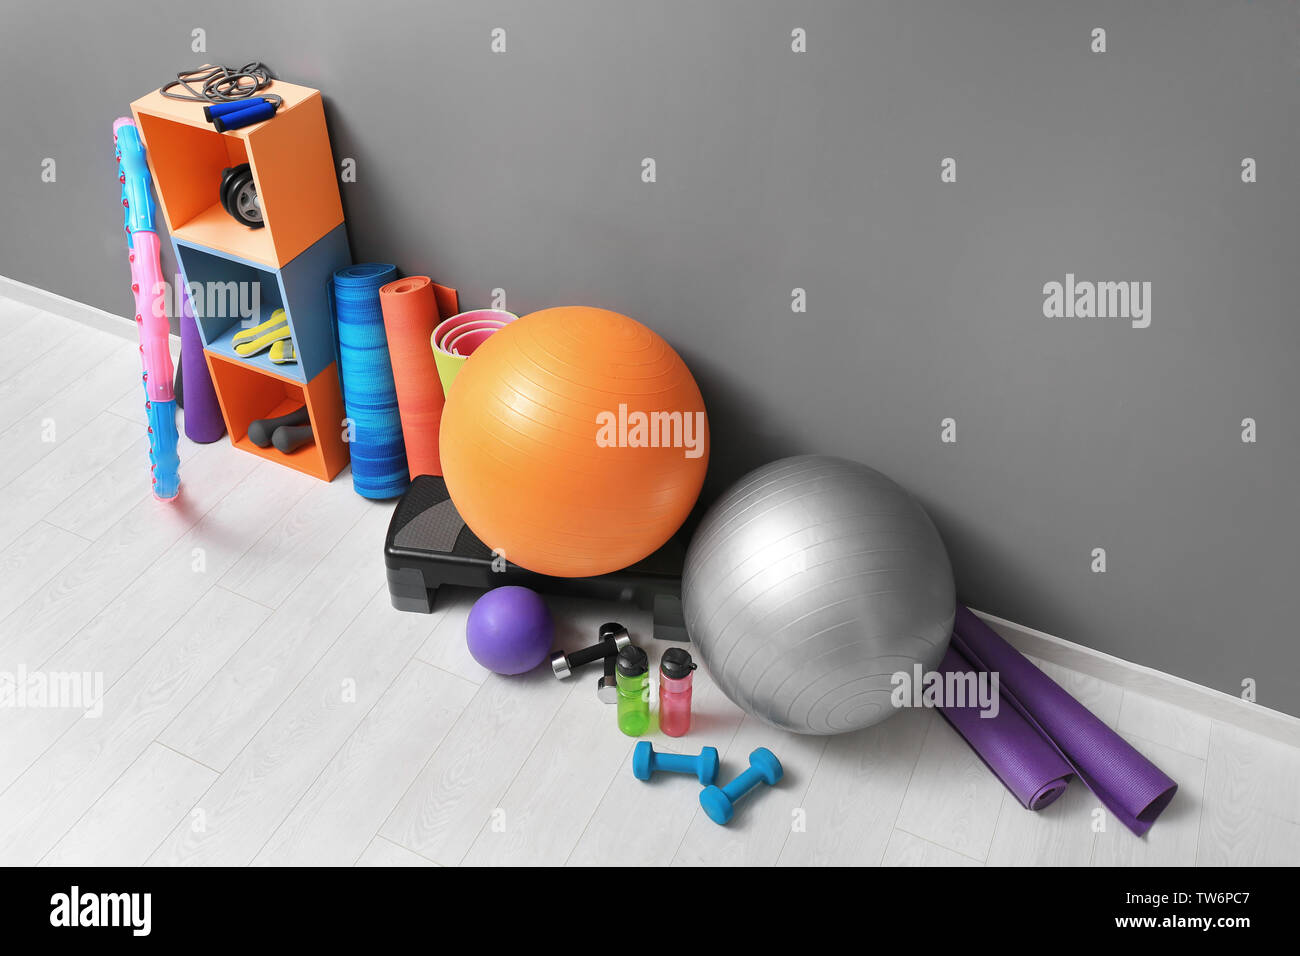 https://c8.alamy.com/comp/TW6PC7/different-physiotherapy-equipment-in-room-TW6PC7.jpg